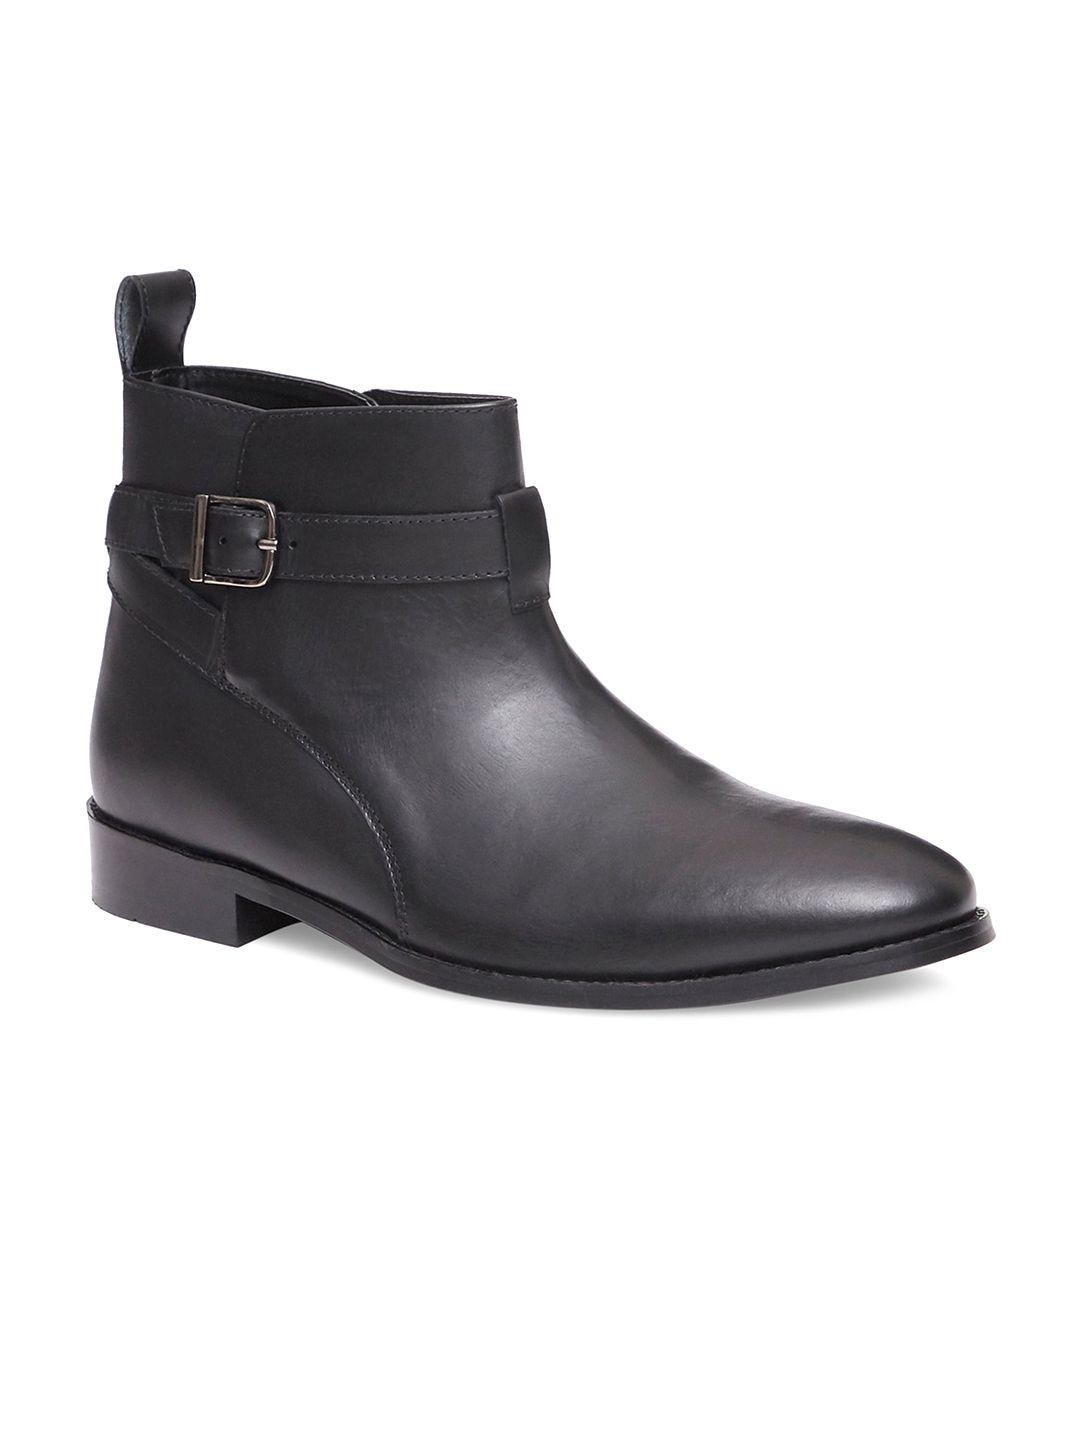 hats-off-accessories-men-black-solid-leather-flat-boots